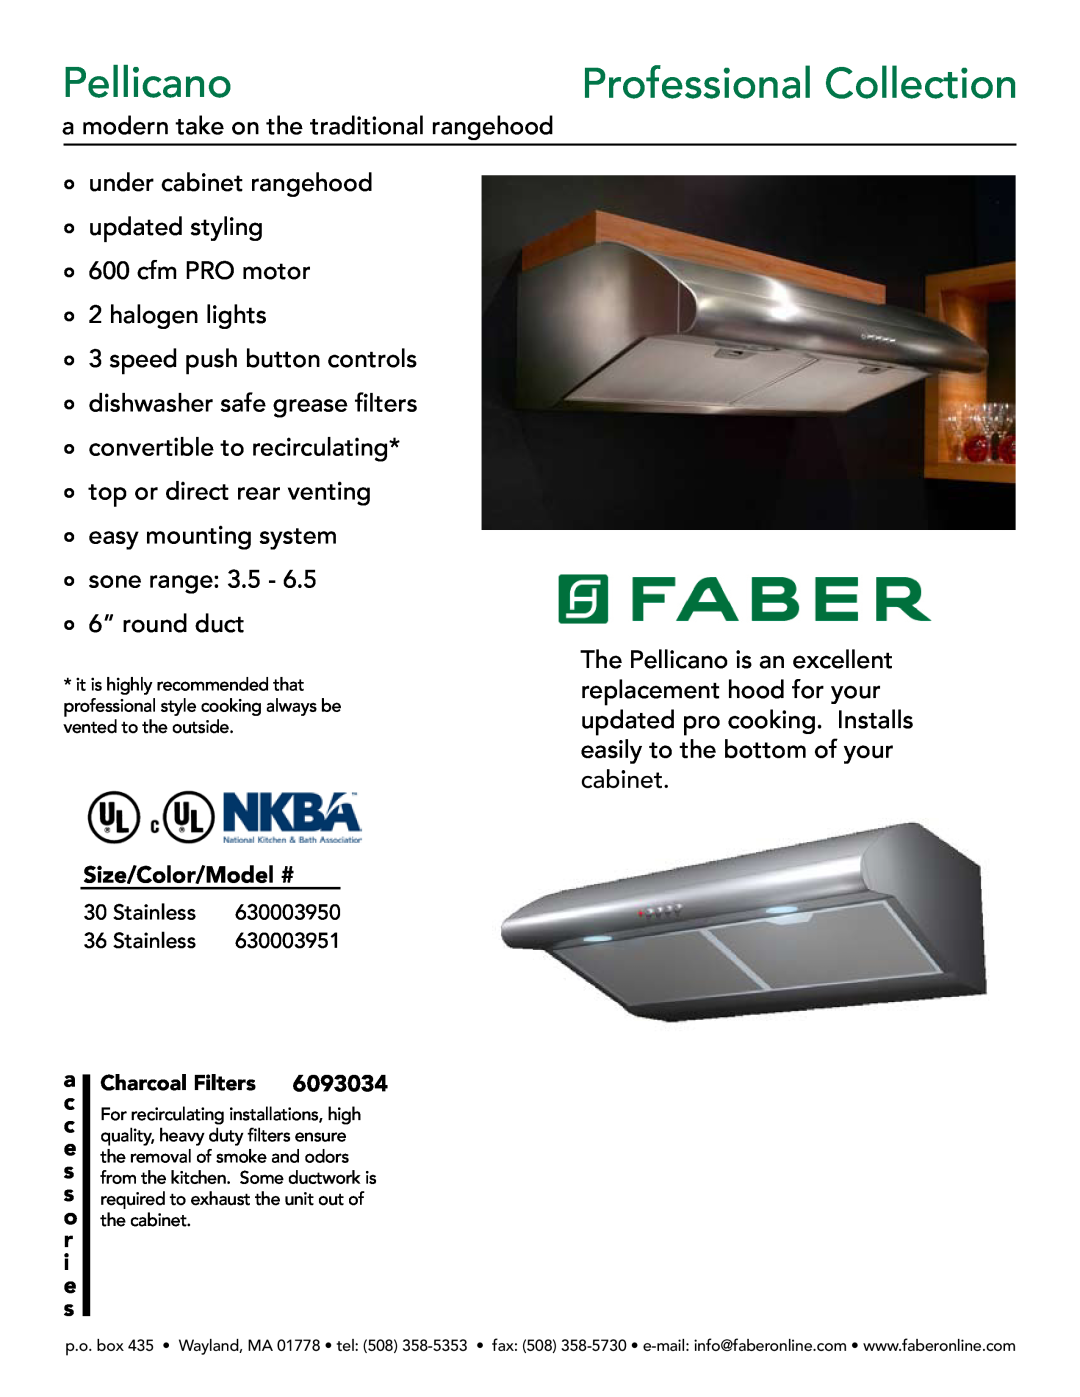 Faber 630003950, 630003951 manual Pellicano, Professional Collection, a modern take on the traditional rangehood 